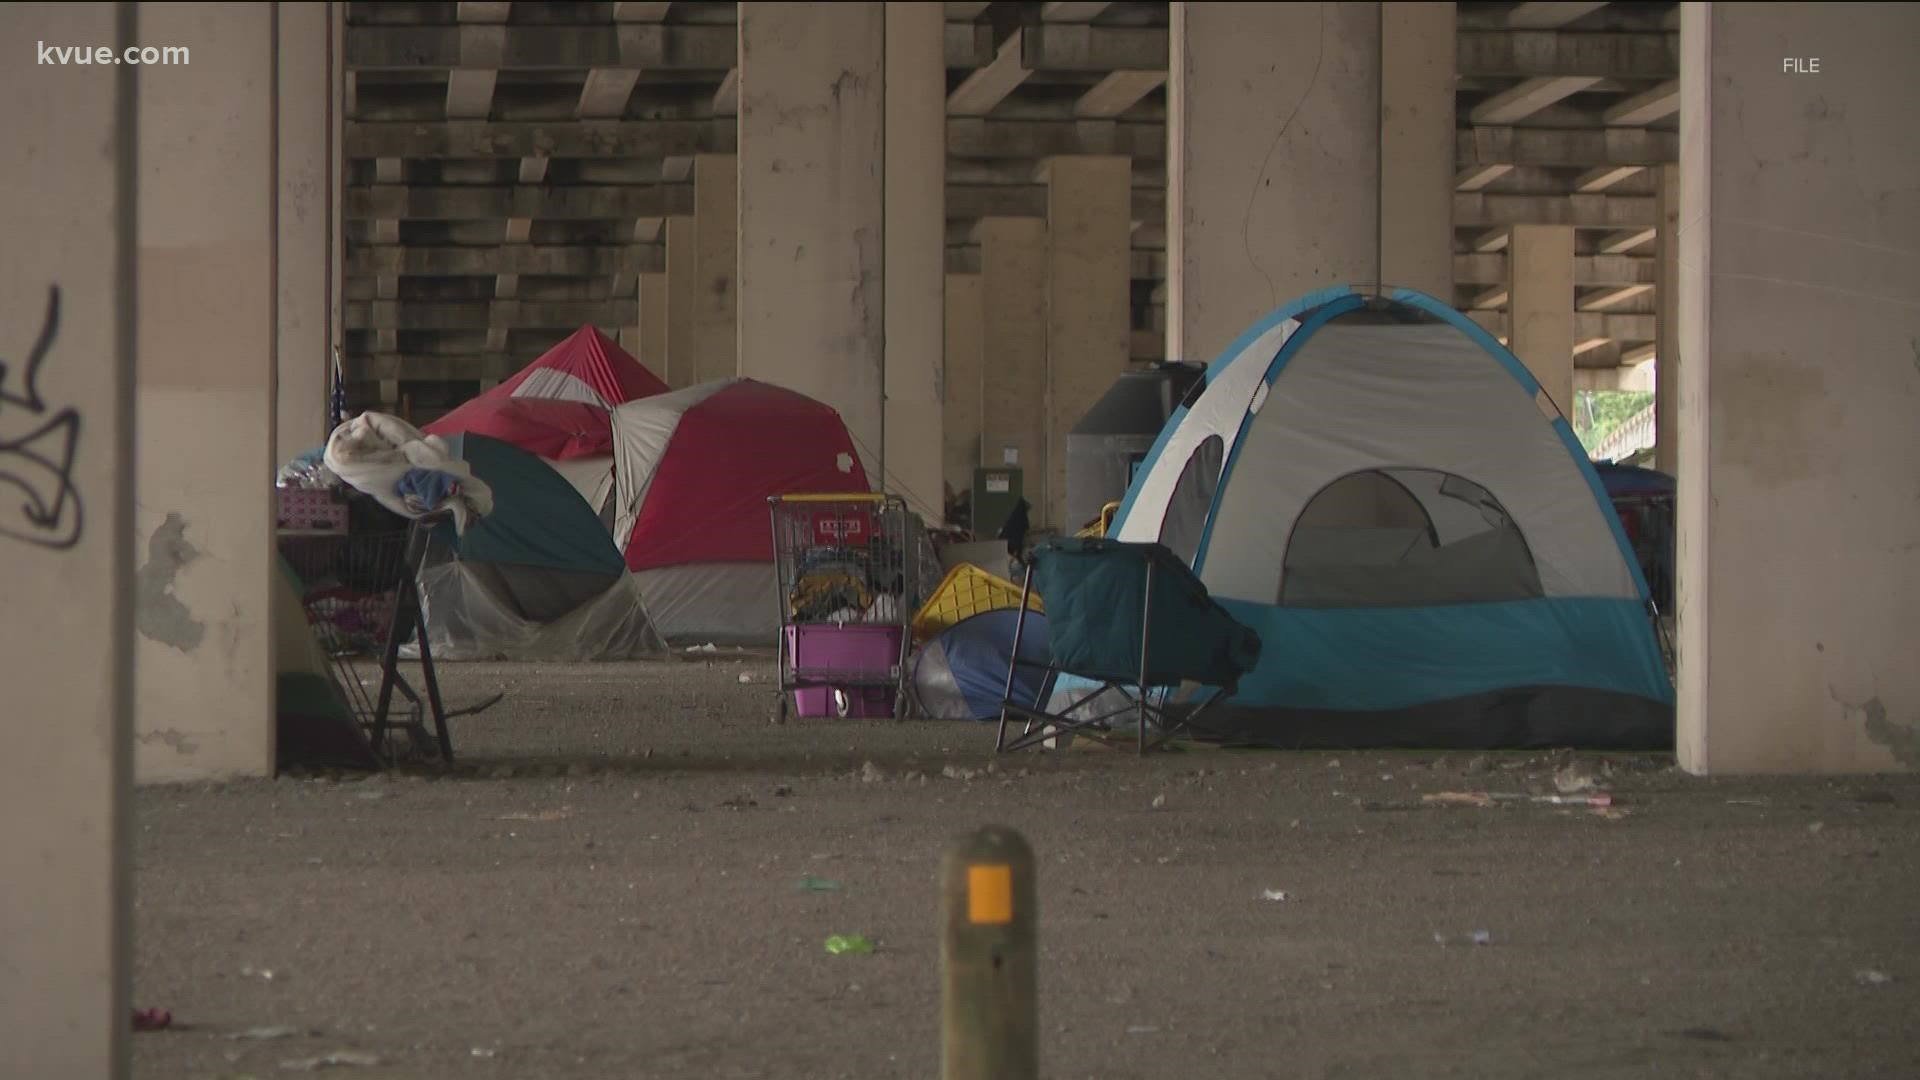 Austin Street Outreach Collaborative is getting millions of dollars to help the homeless.